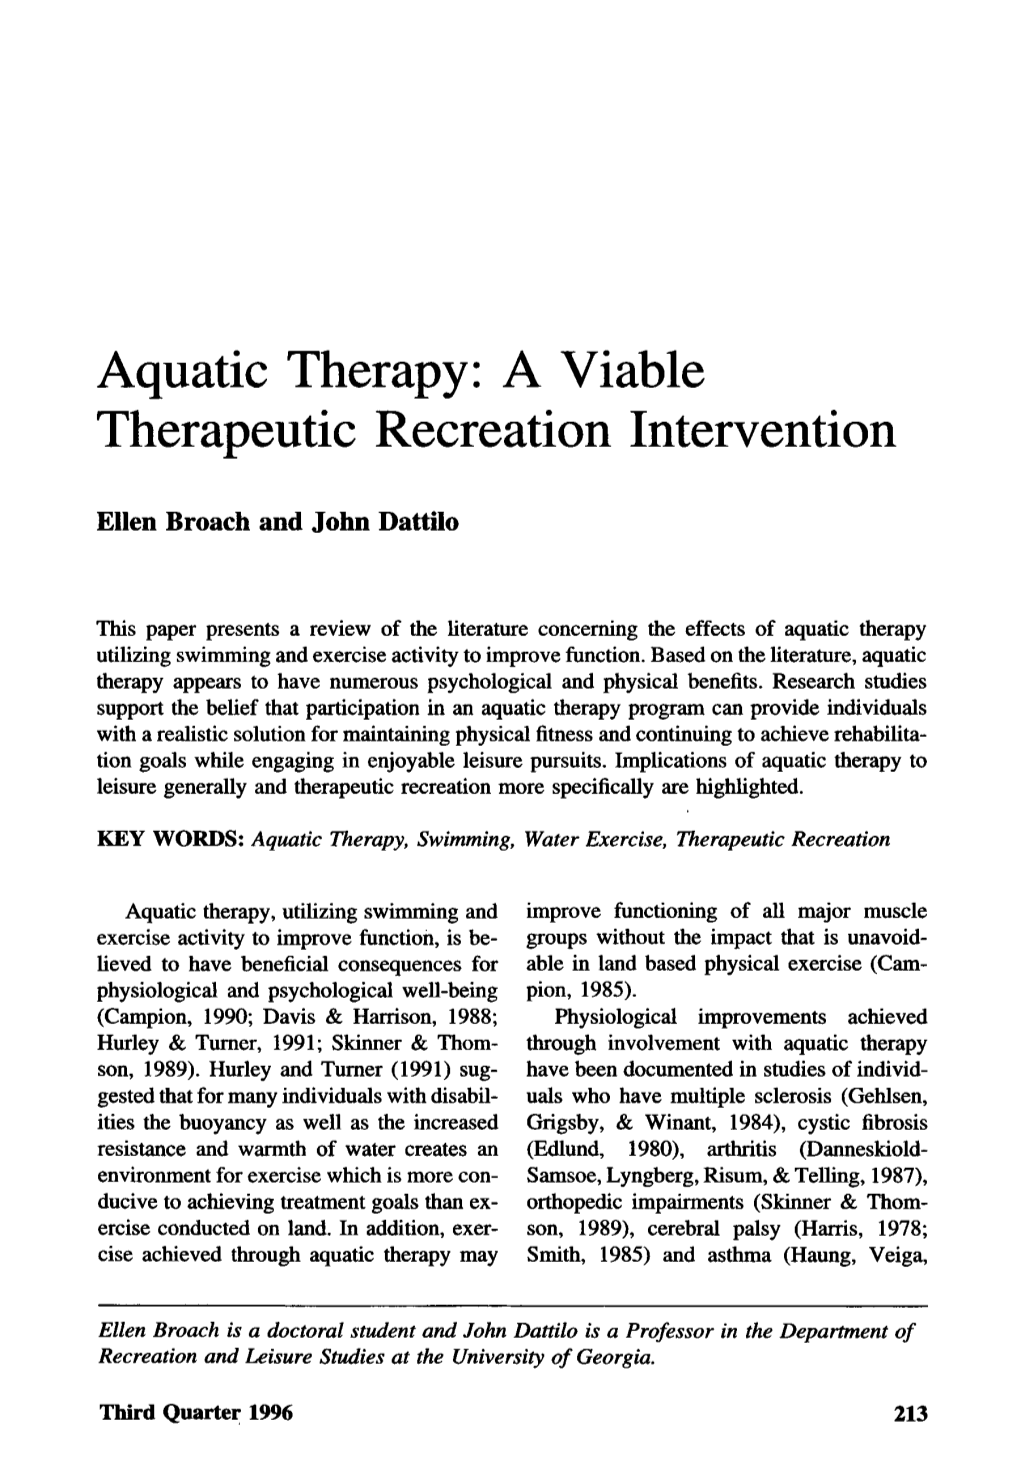 Aquatic Therapy: a Viable Therapeutic Recreation Intervention